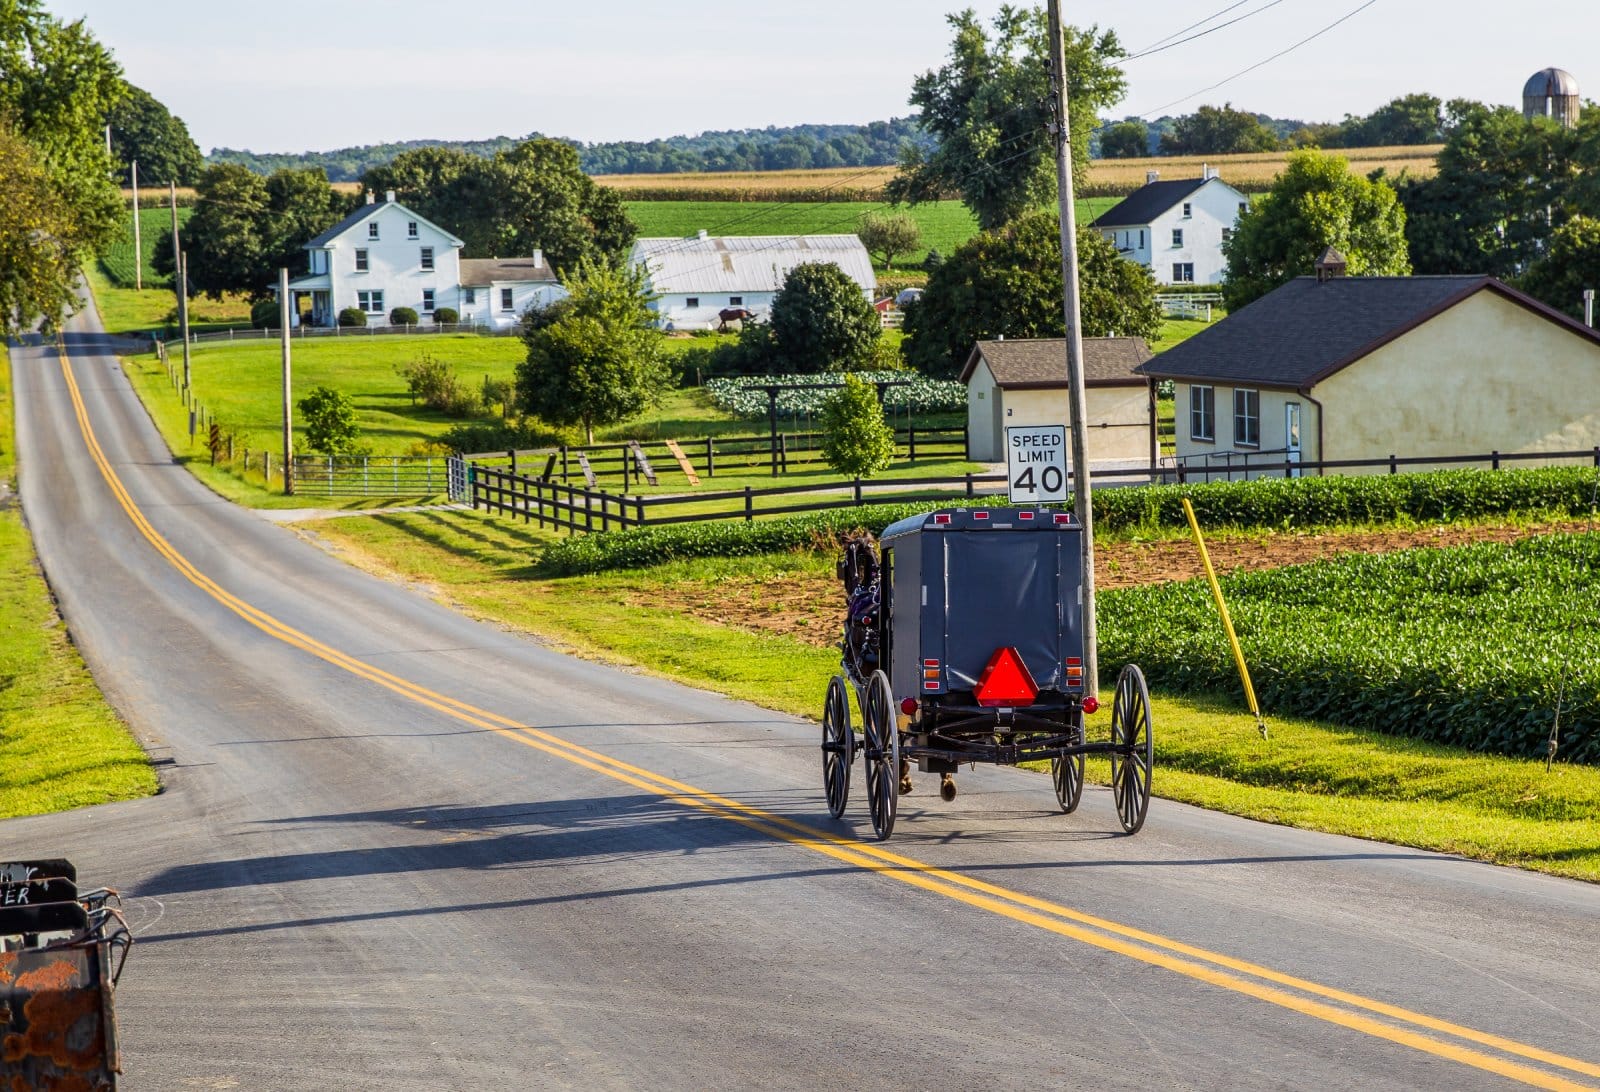 Image Credit: Shutterstock / hutch photography <p><span>Life in Amish communities moves at a horse-drawn buggy’s pace. It’s charming but starkly different from the hustle just a few miles away.</span></p>